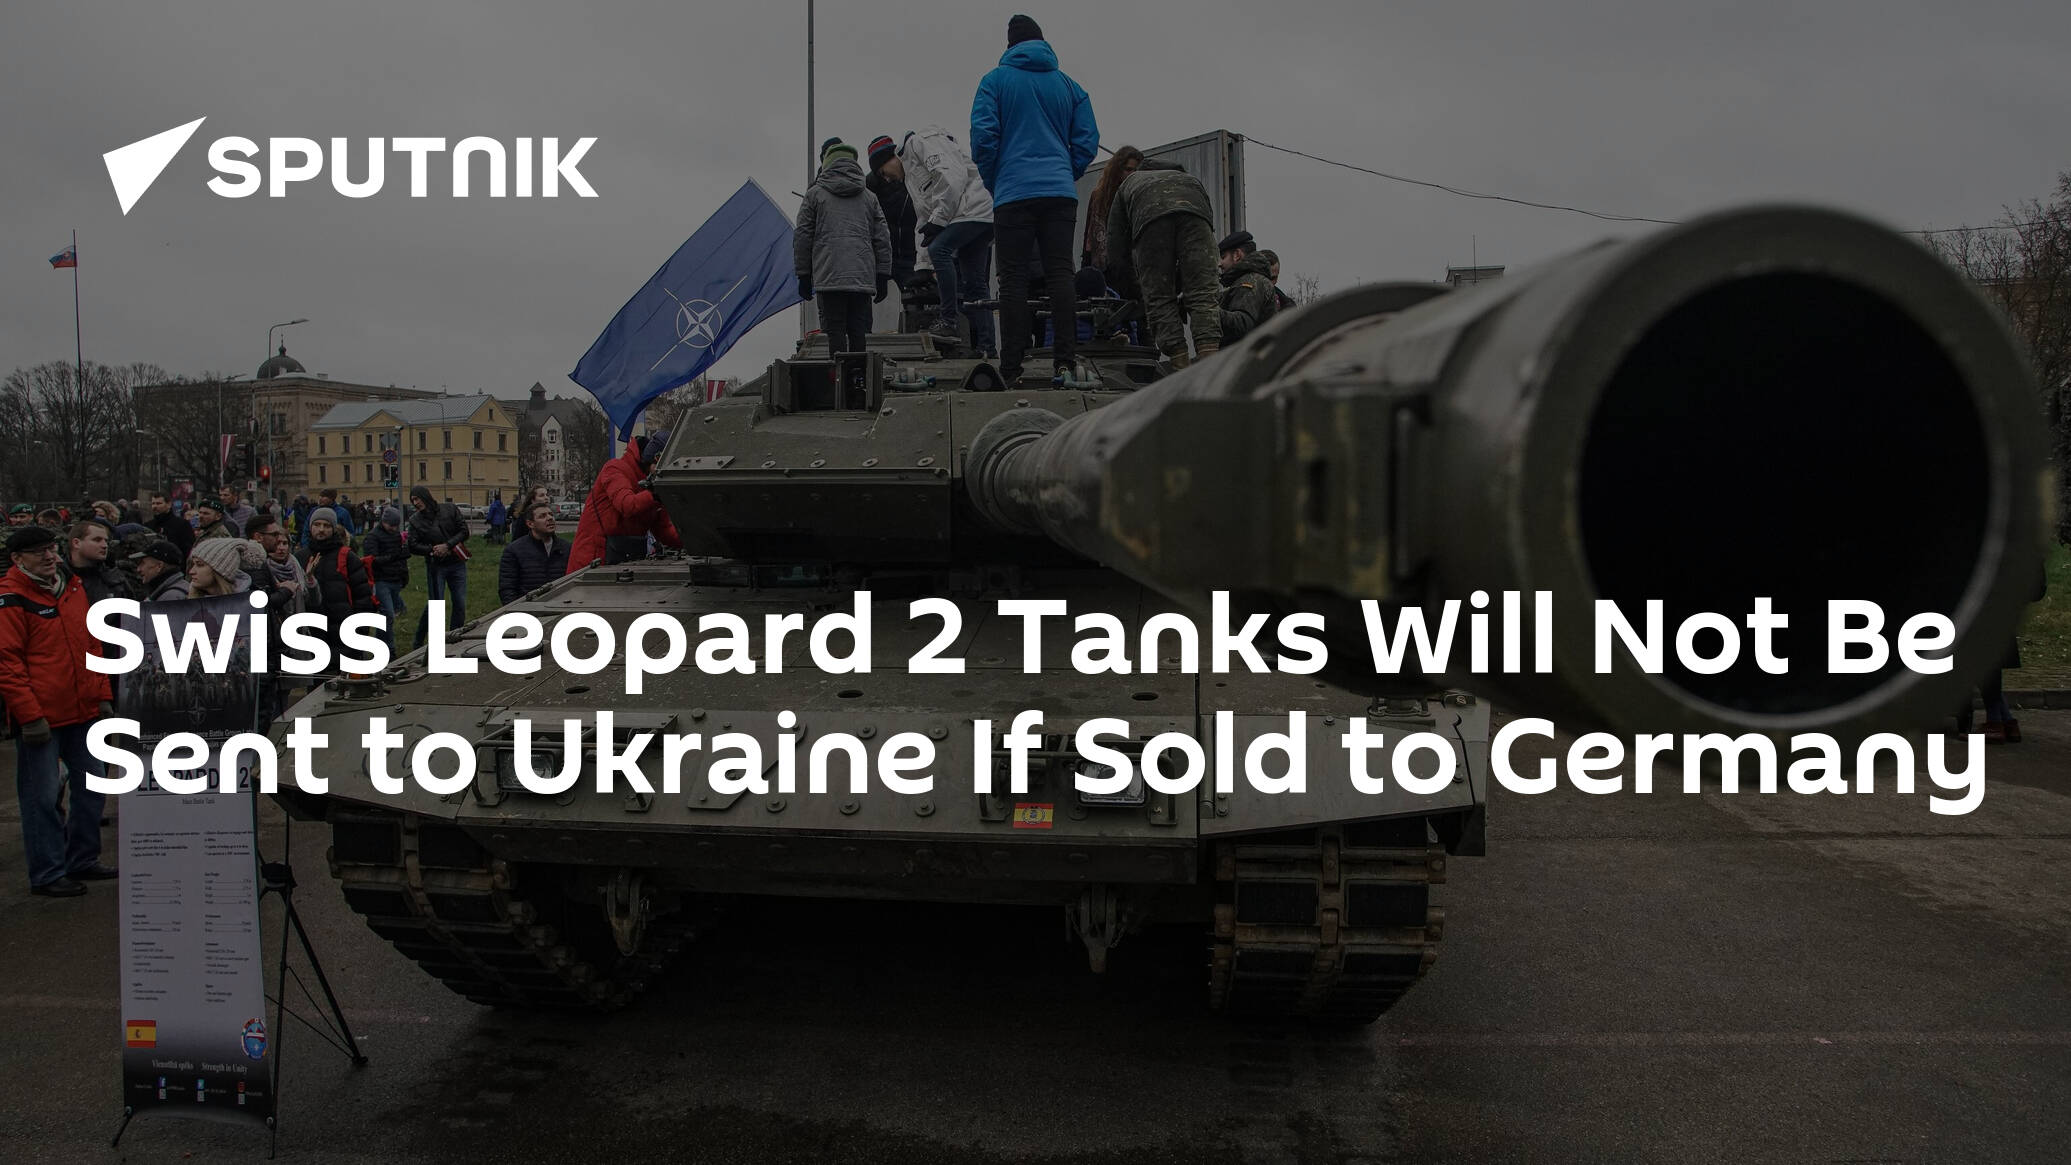 Swiss Leopard 2 Tanks Will Not Be Sent to Ukraine If Sold to Germany